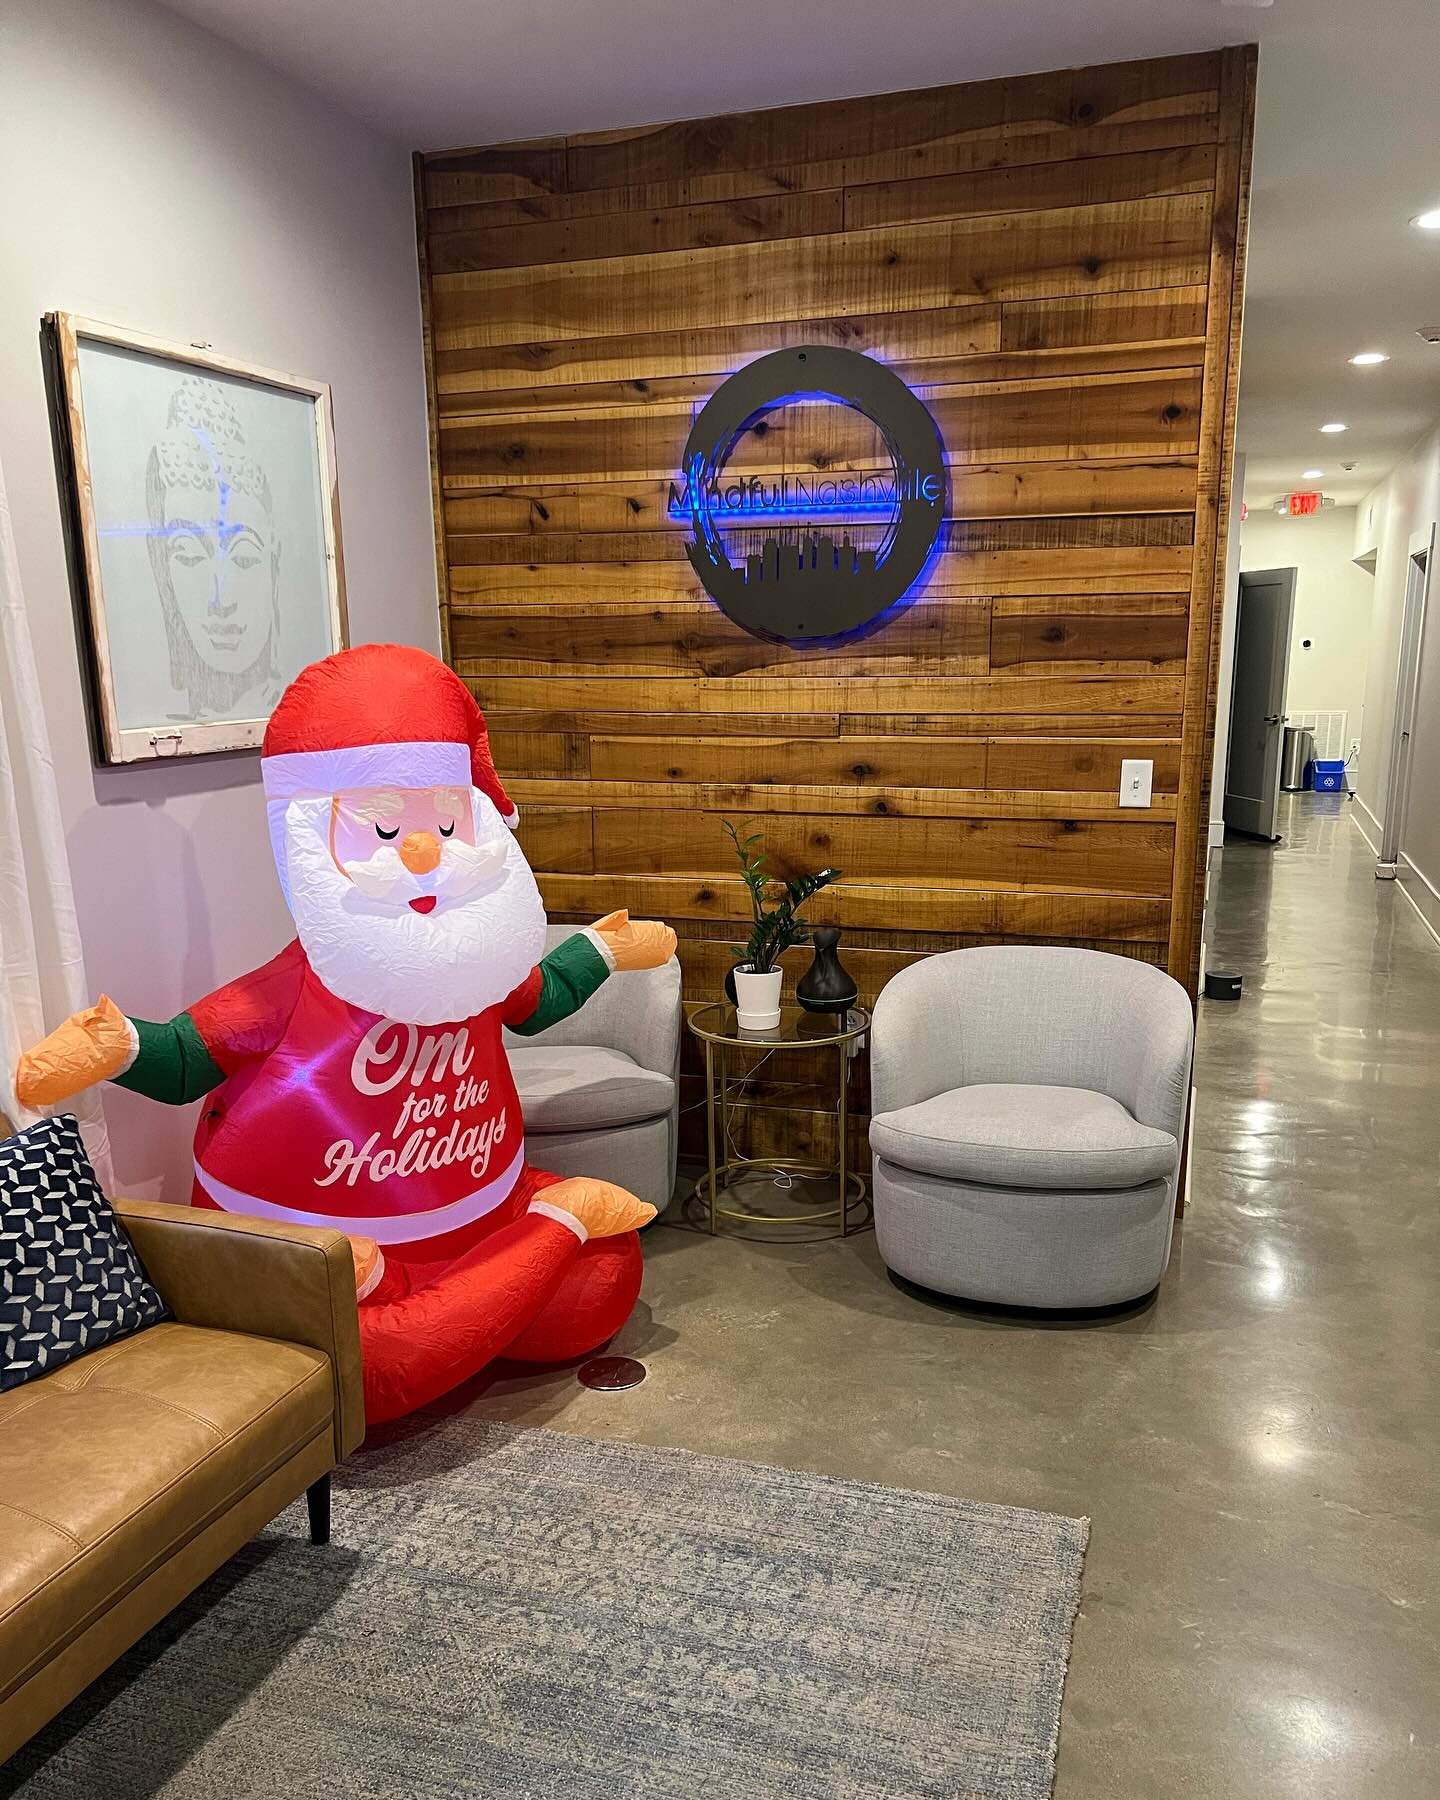 Santa is getting his full lotus on, greeting guests in the waiting room. Channeling some Santa yoga vibes. Thank you Juliana for inviting Santa to hang out! Wishing everyone a chill and heart centered weekend ❤️🤗🙏#nashvilleyoga